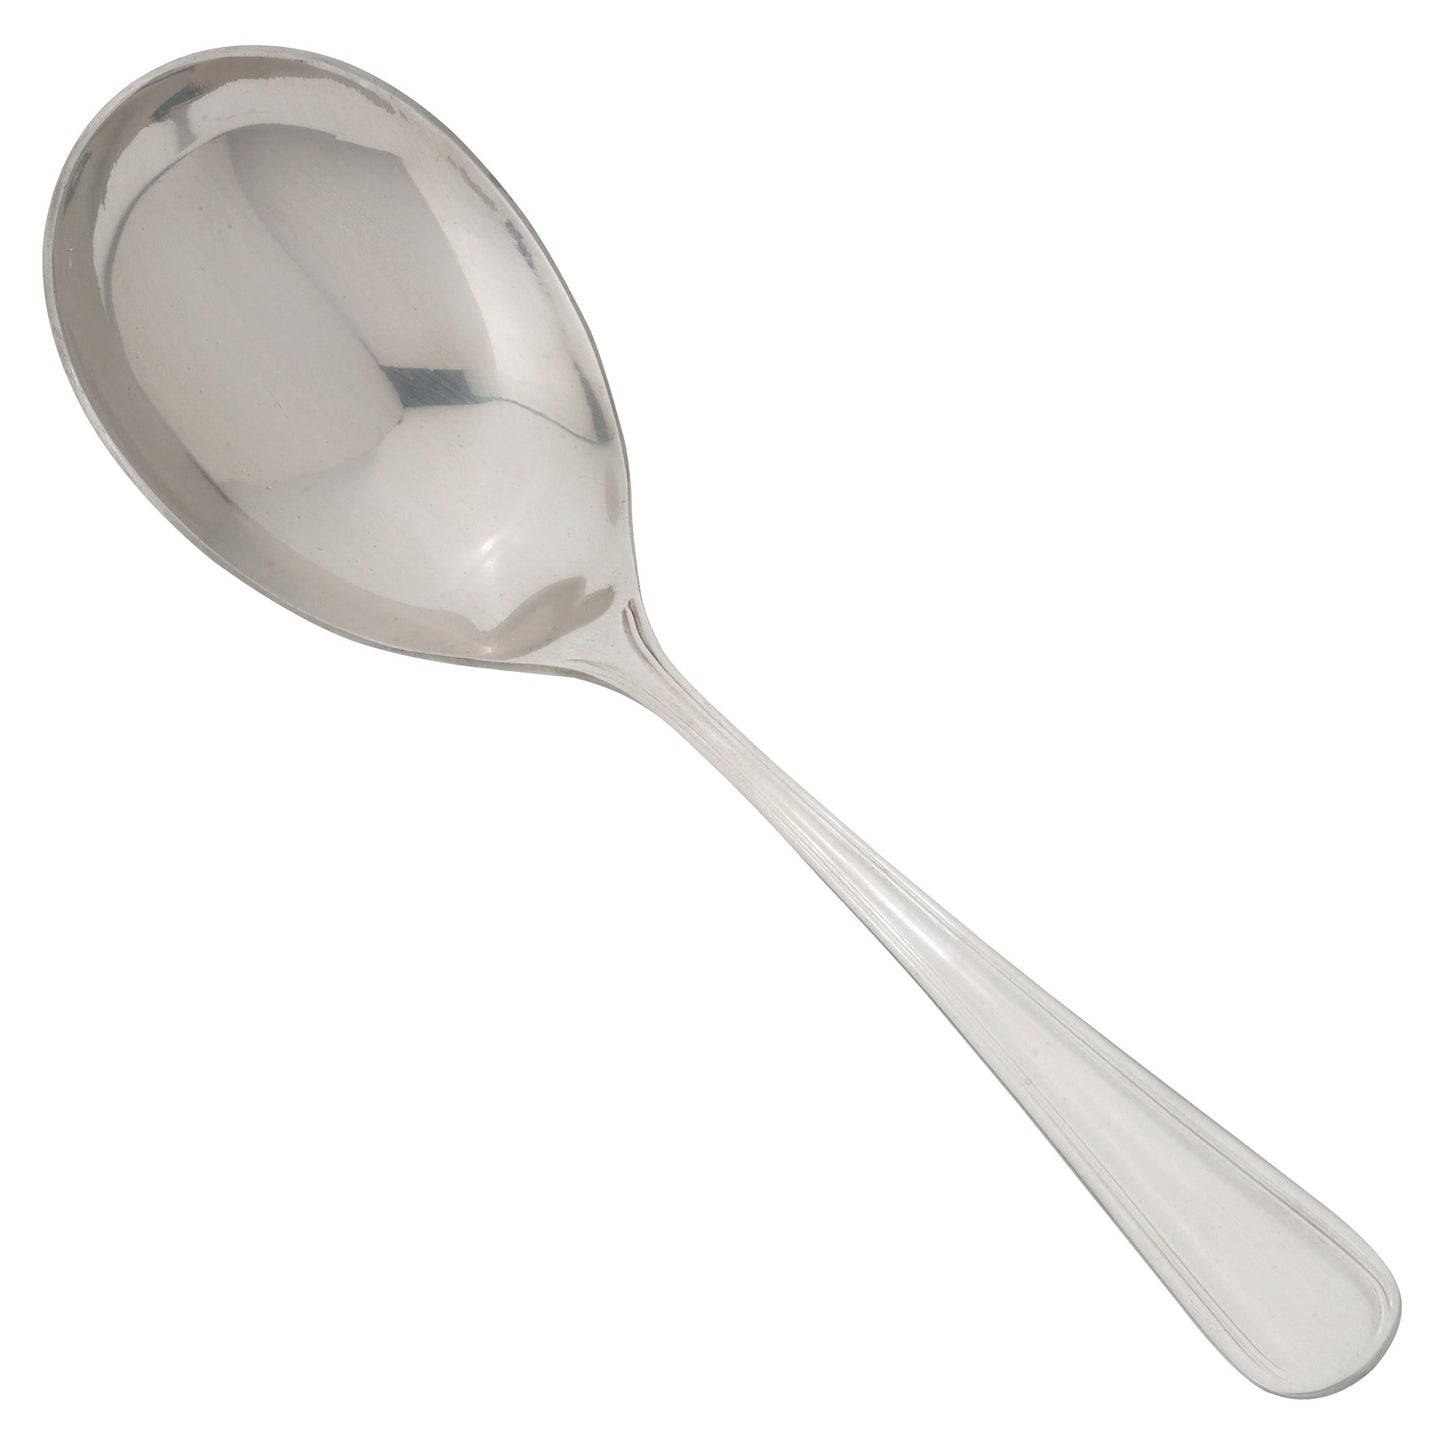 0030-21 - Shangarila Large Bowl Serving Spoon, 18/8 Extra Heavyweight